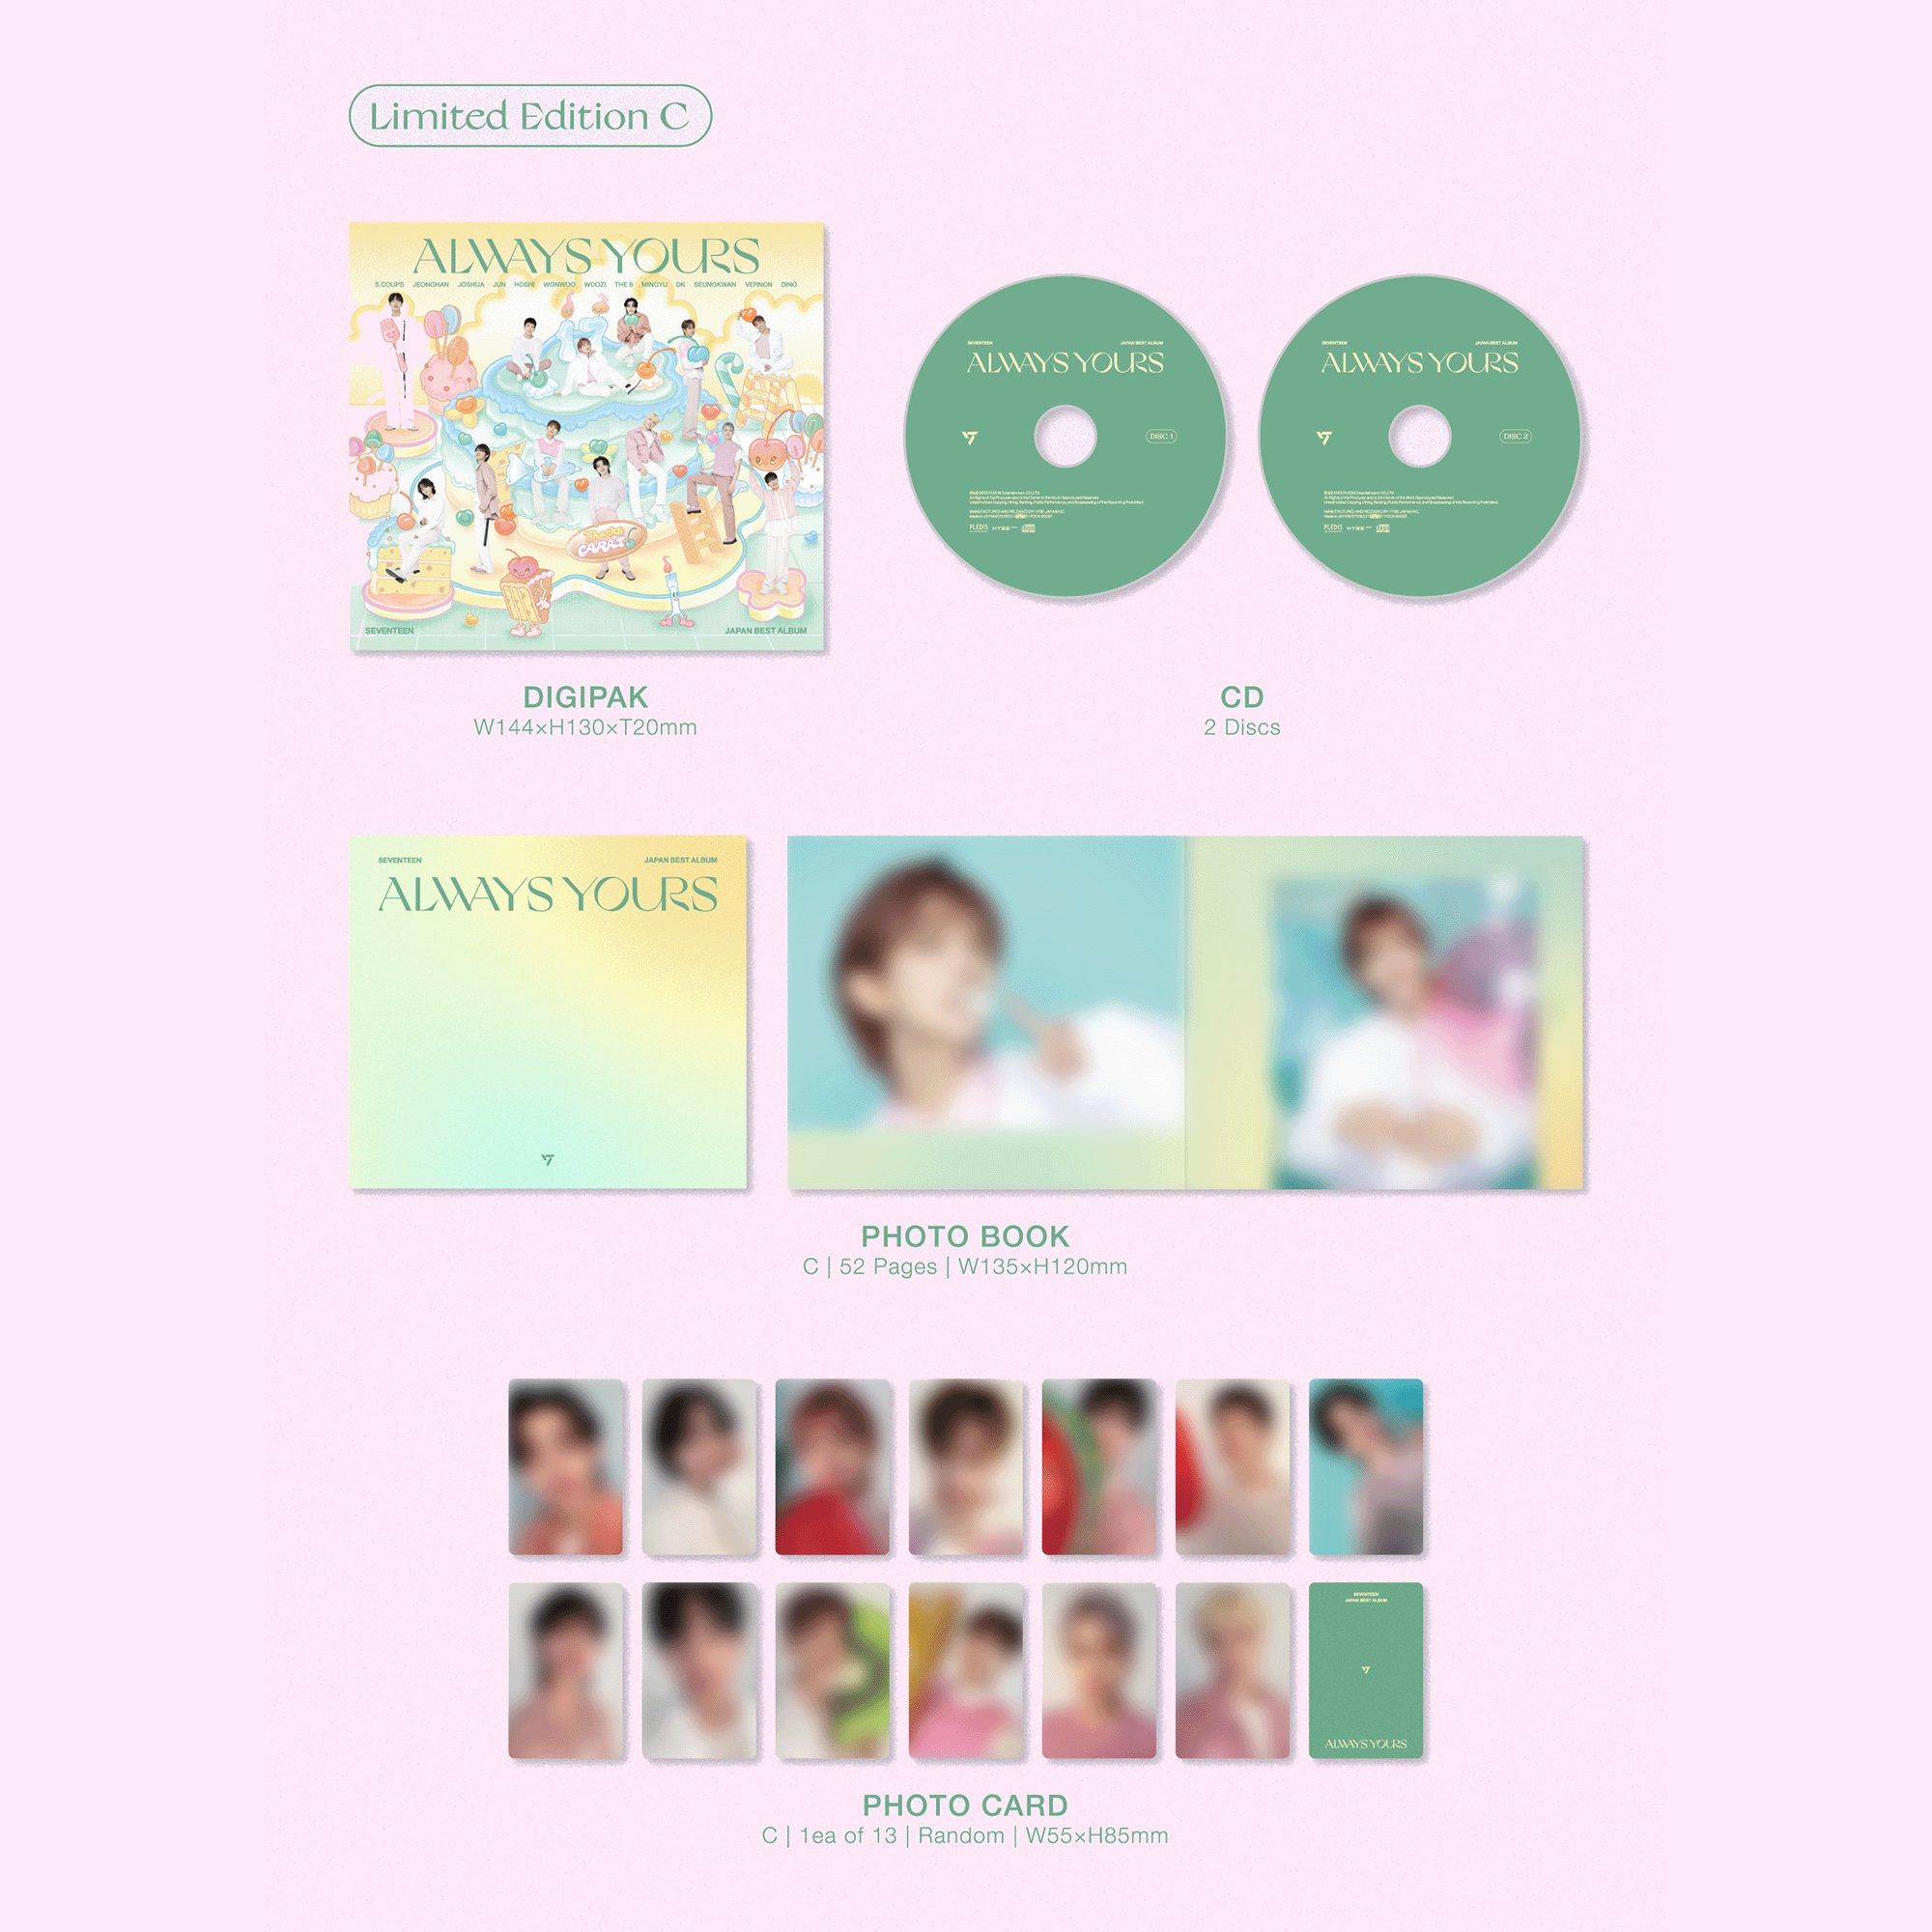 SEVENTEEN - Always Yours: 2CD + Photobook (Limited Edition C)